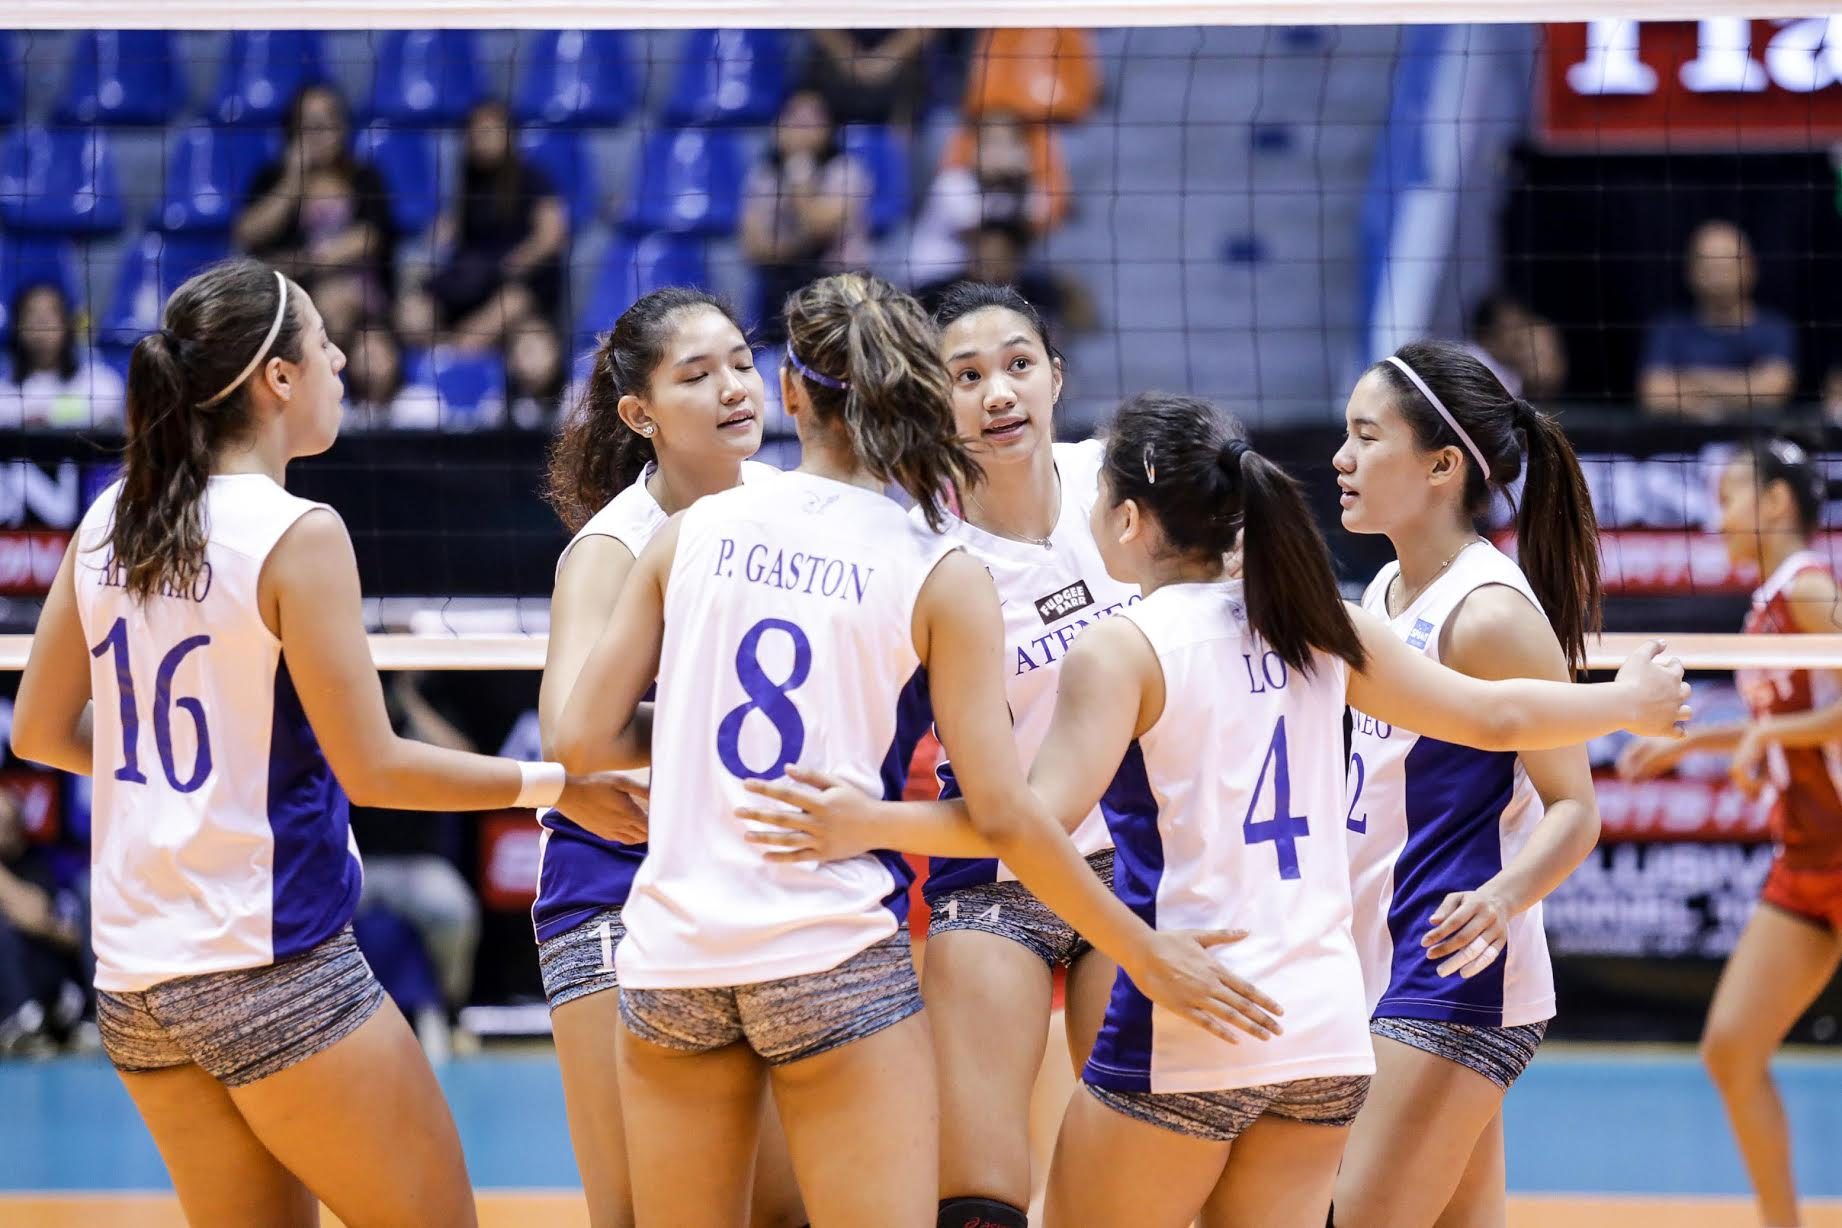 Lady Eagles win friendly match as Thailand training opens